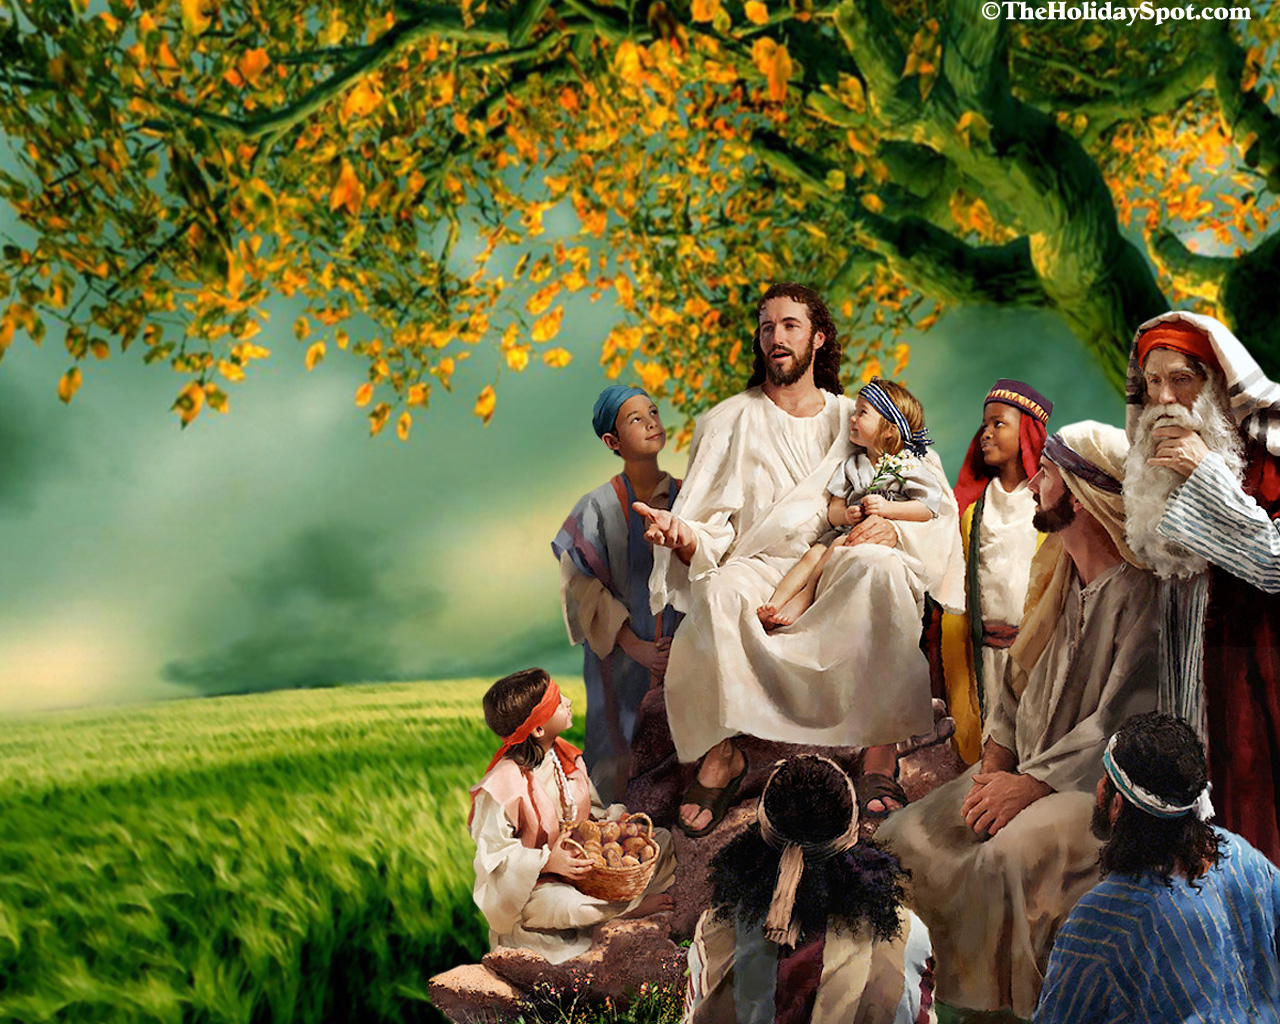 http://www.theholidayspot.com/christmas/wallpapers/new_images/jesus-giving-sermon.jpg